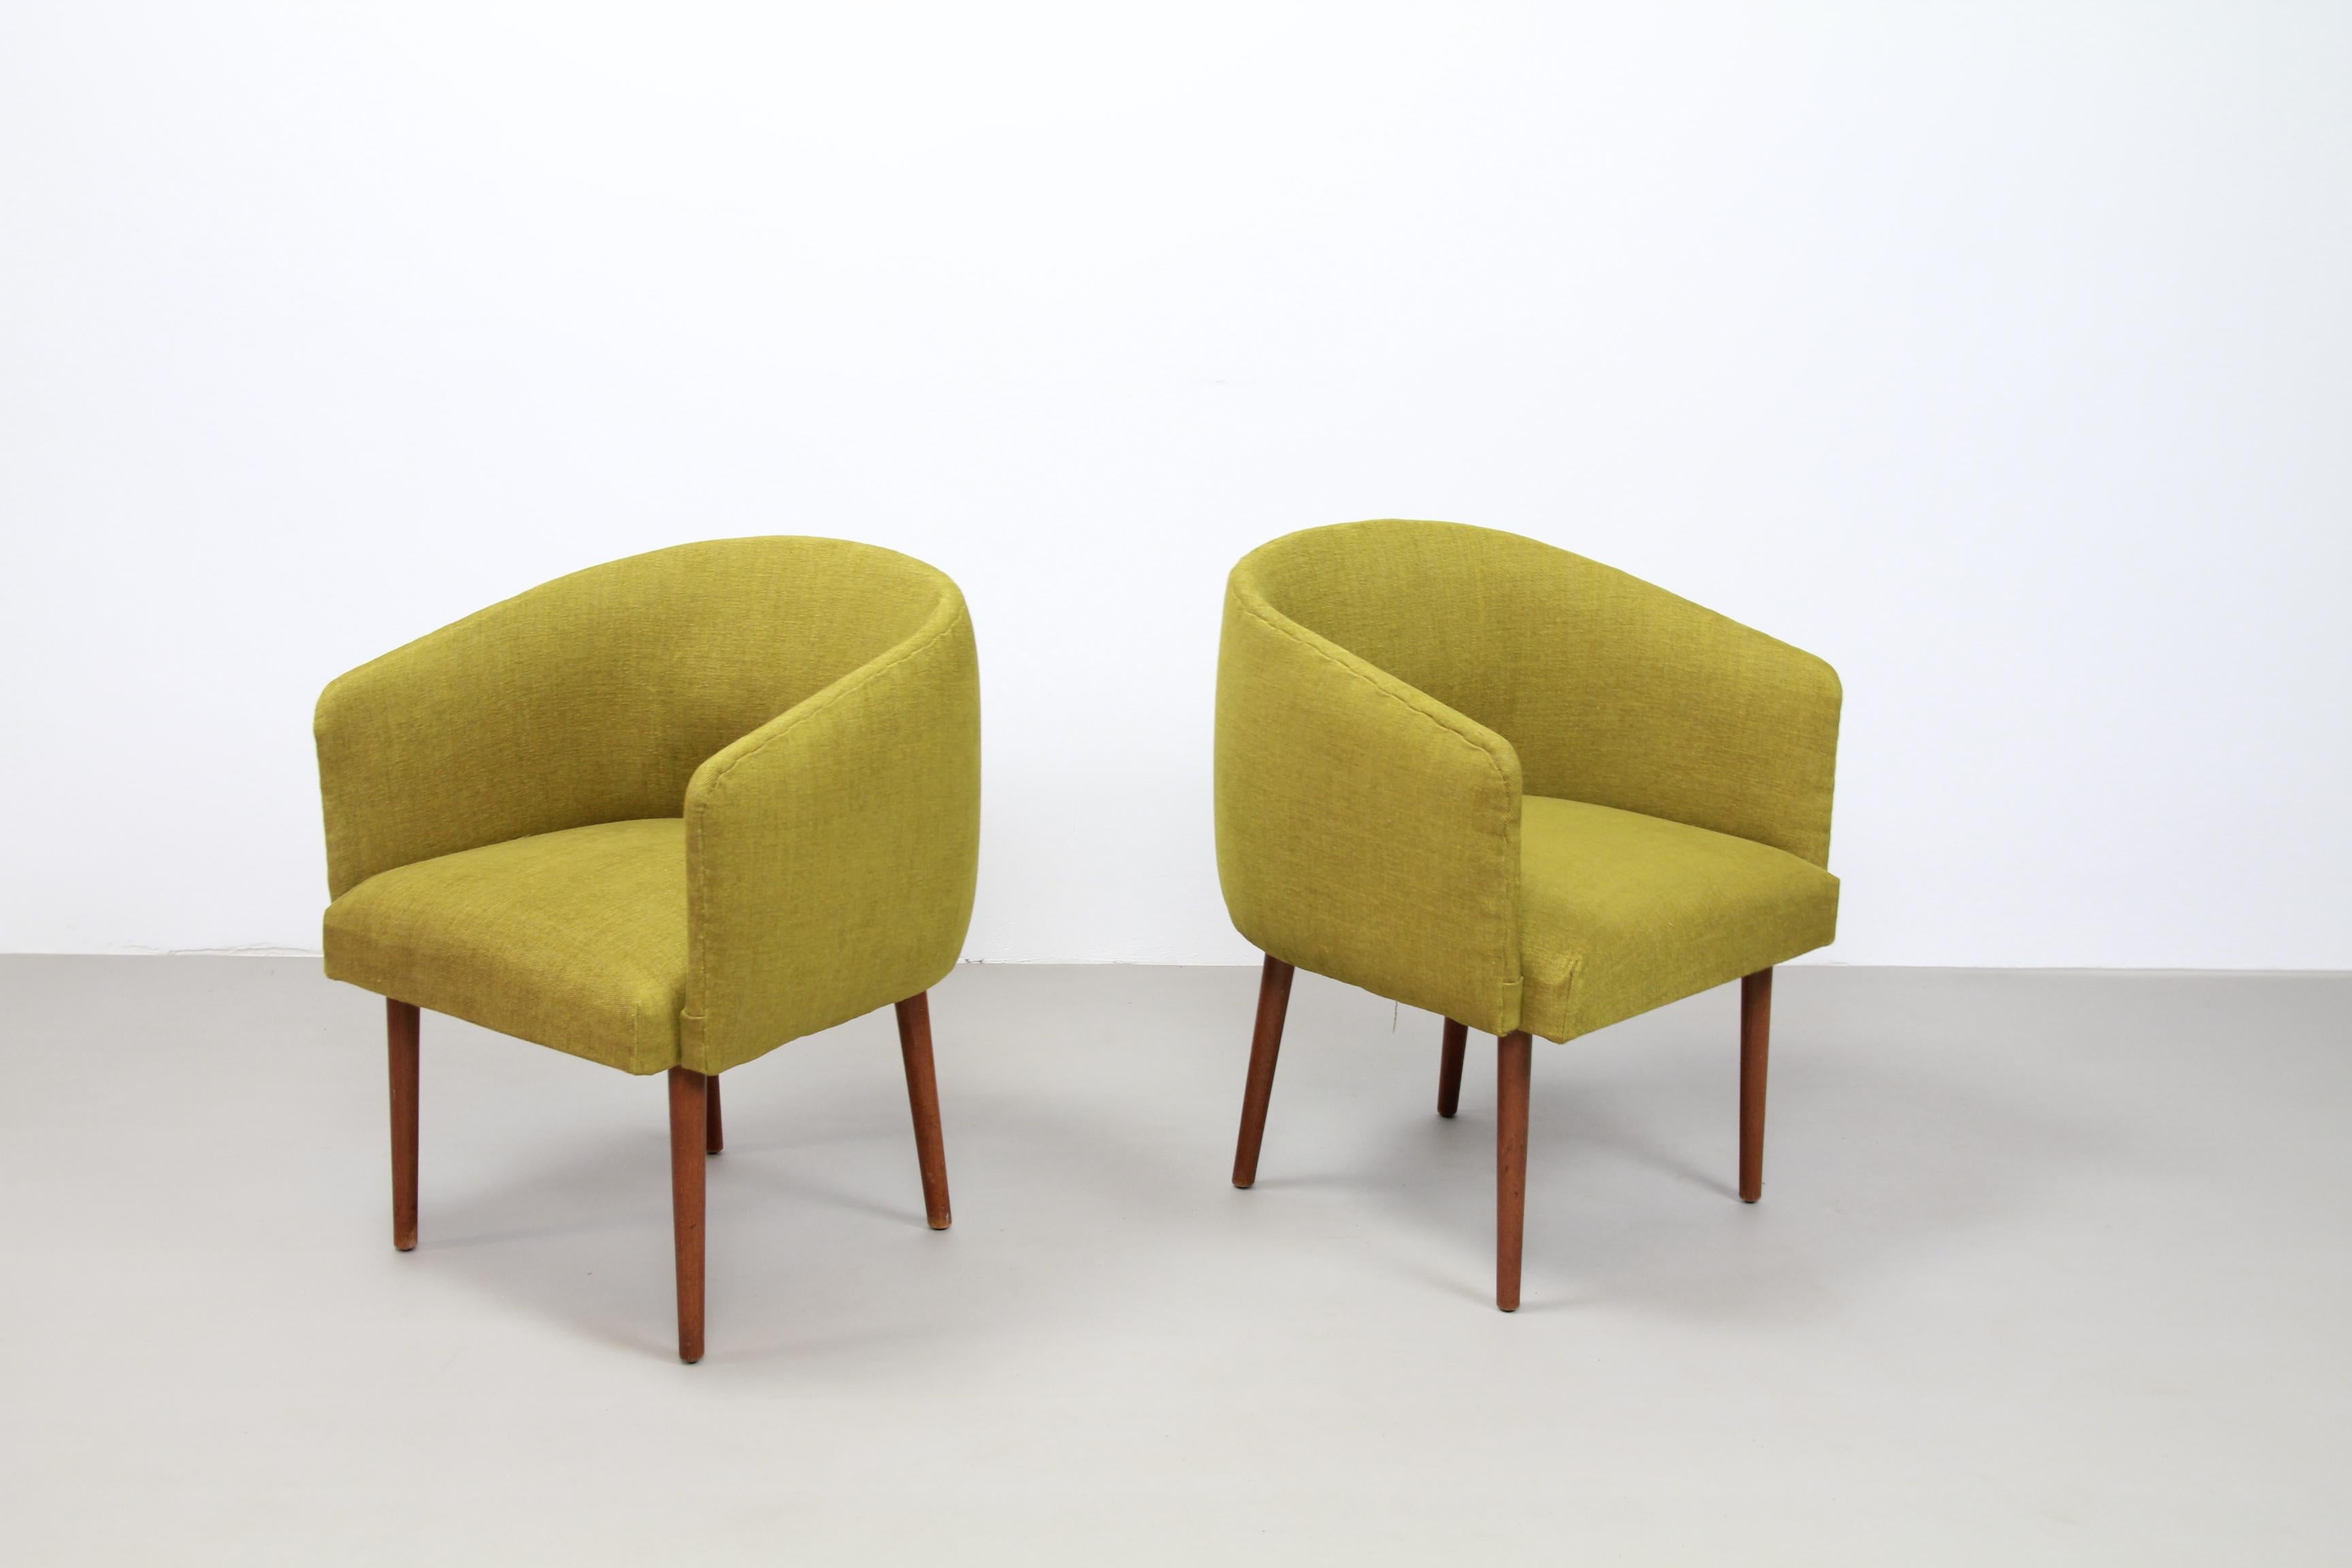 Dutch Set of Two Yellow Mid-Century Modern Club Chairs